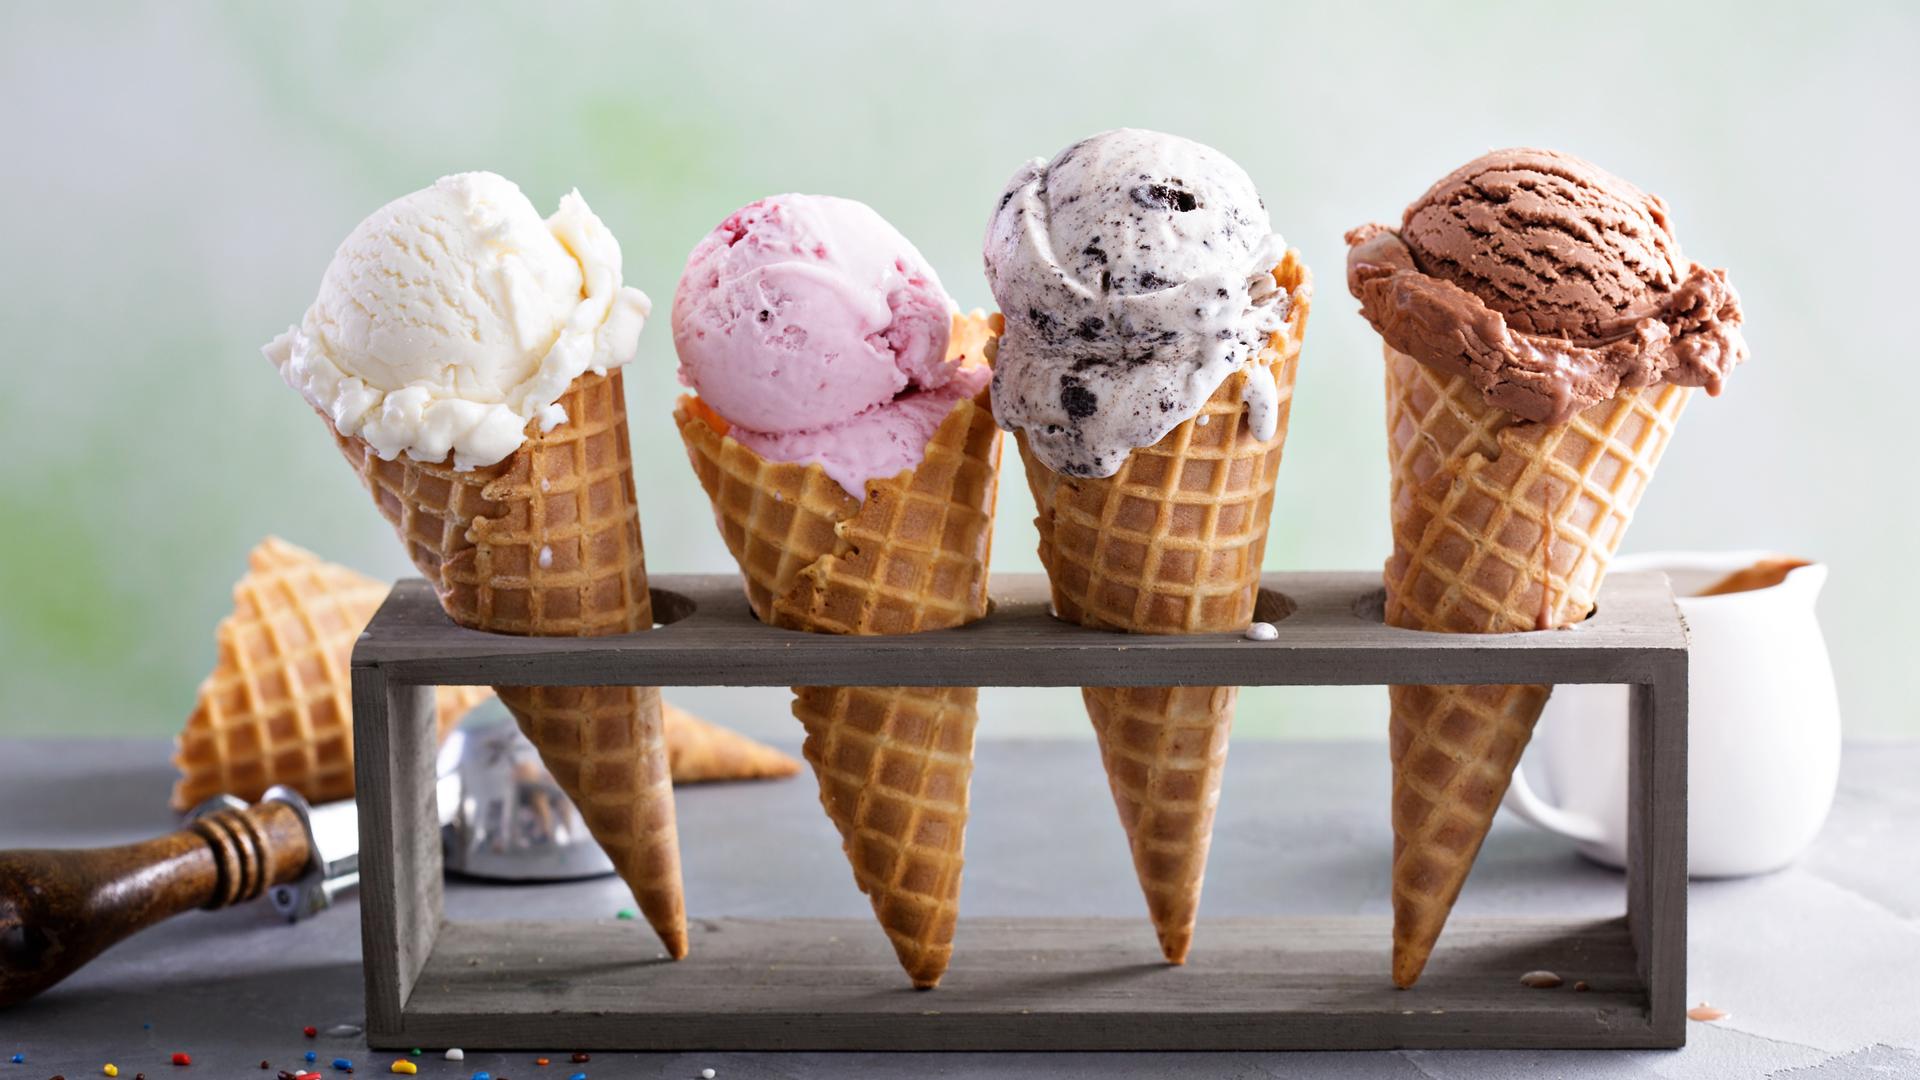 Vegan, lactose-free, or full on cream and chocolate, the ice cream season has begun in Luxembourg 